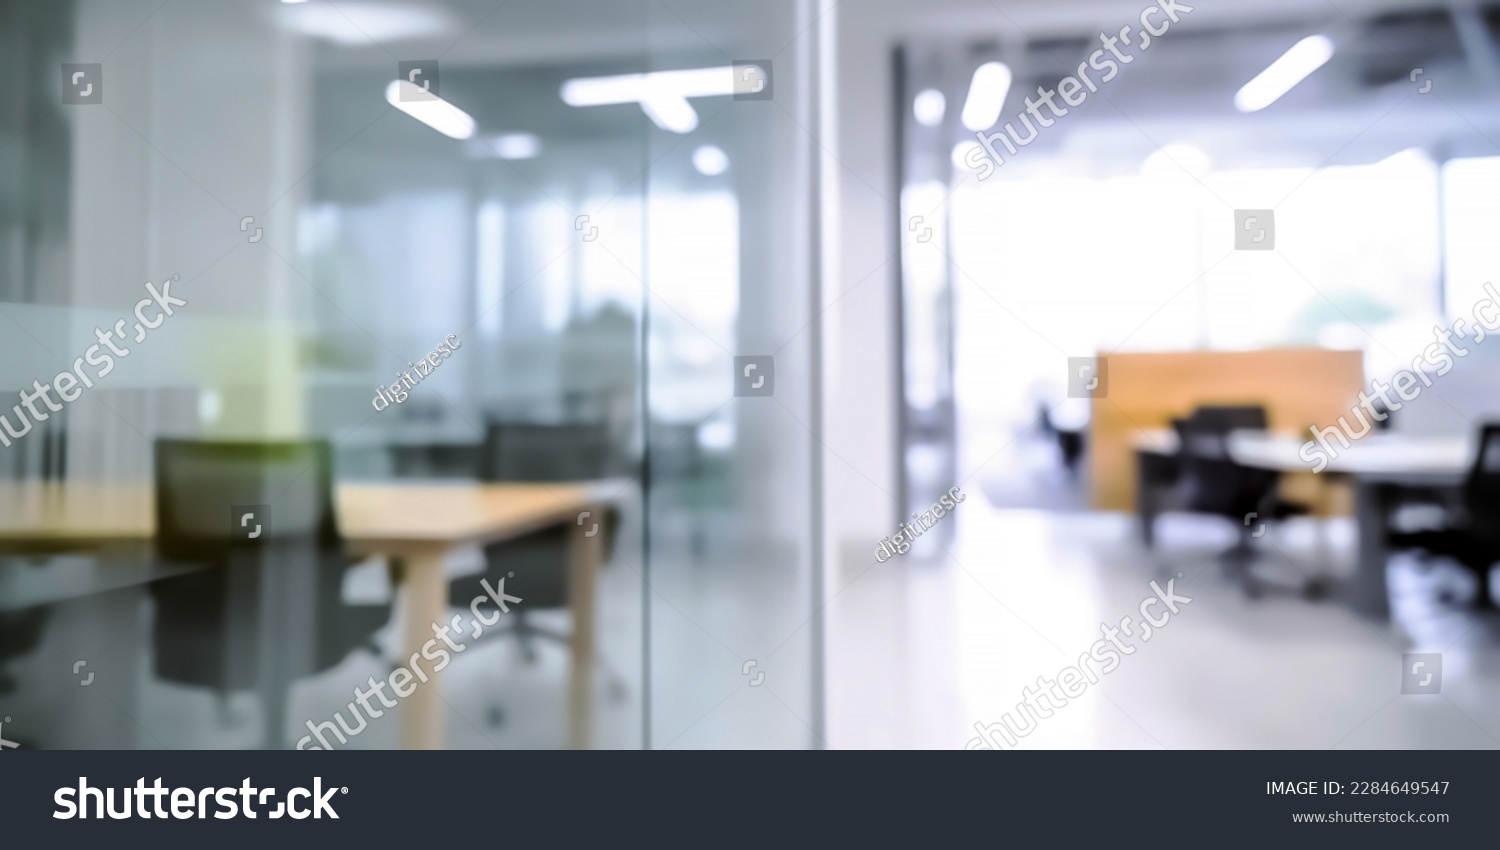 Abstract blurred office interior room #2284649547